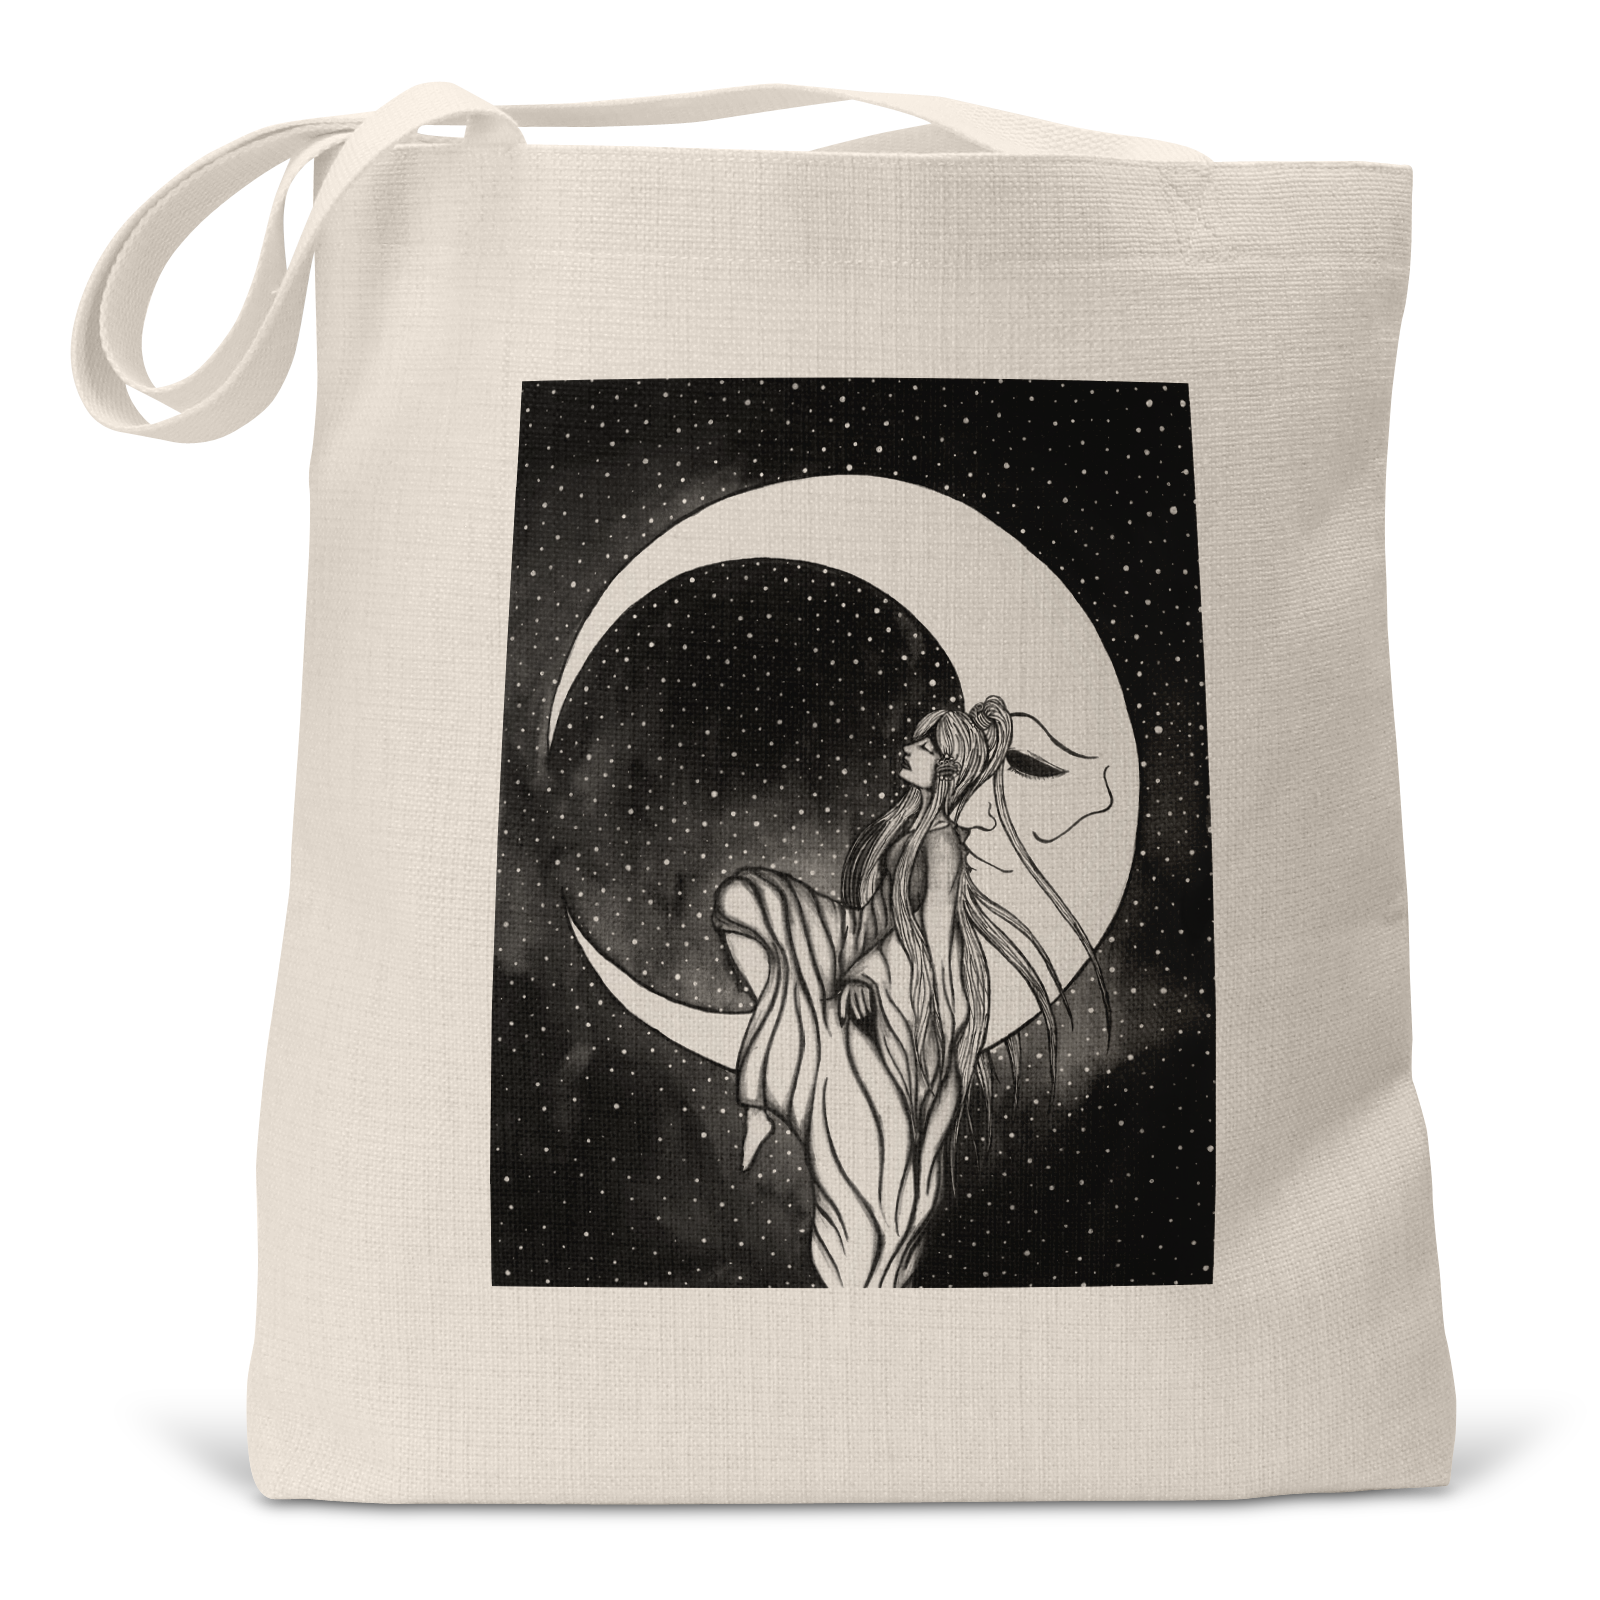 "A Moon and His Princess" - Small/Large Linen Tote